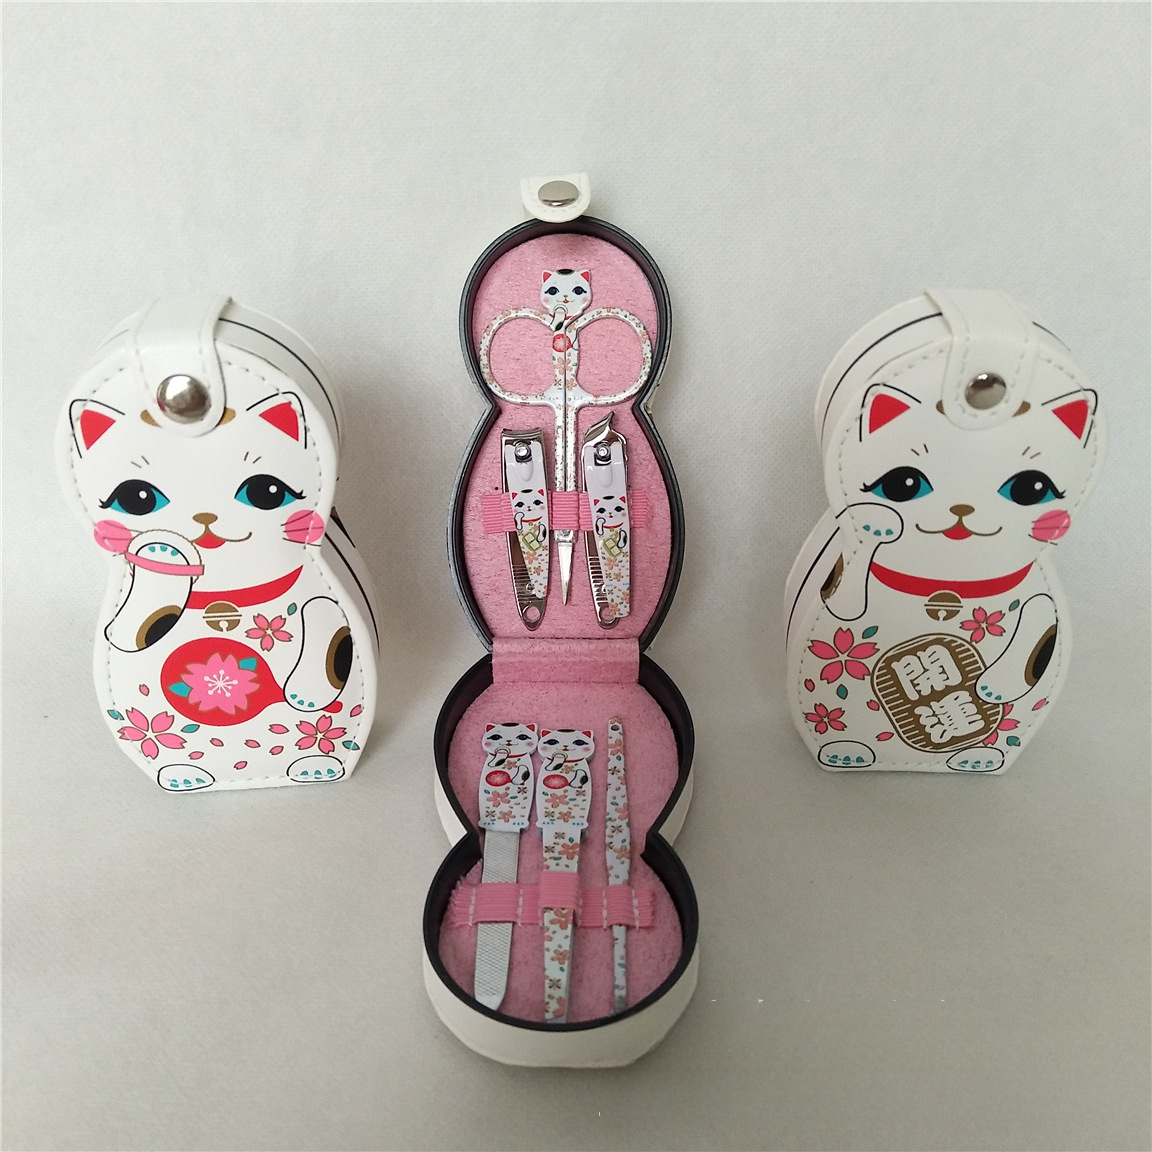 6-piece cat grooming set, nail clipper set, manicure tool set